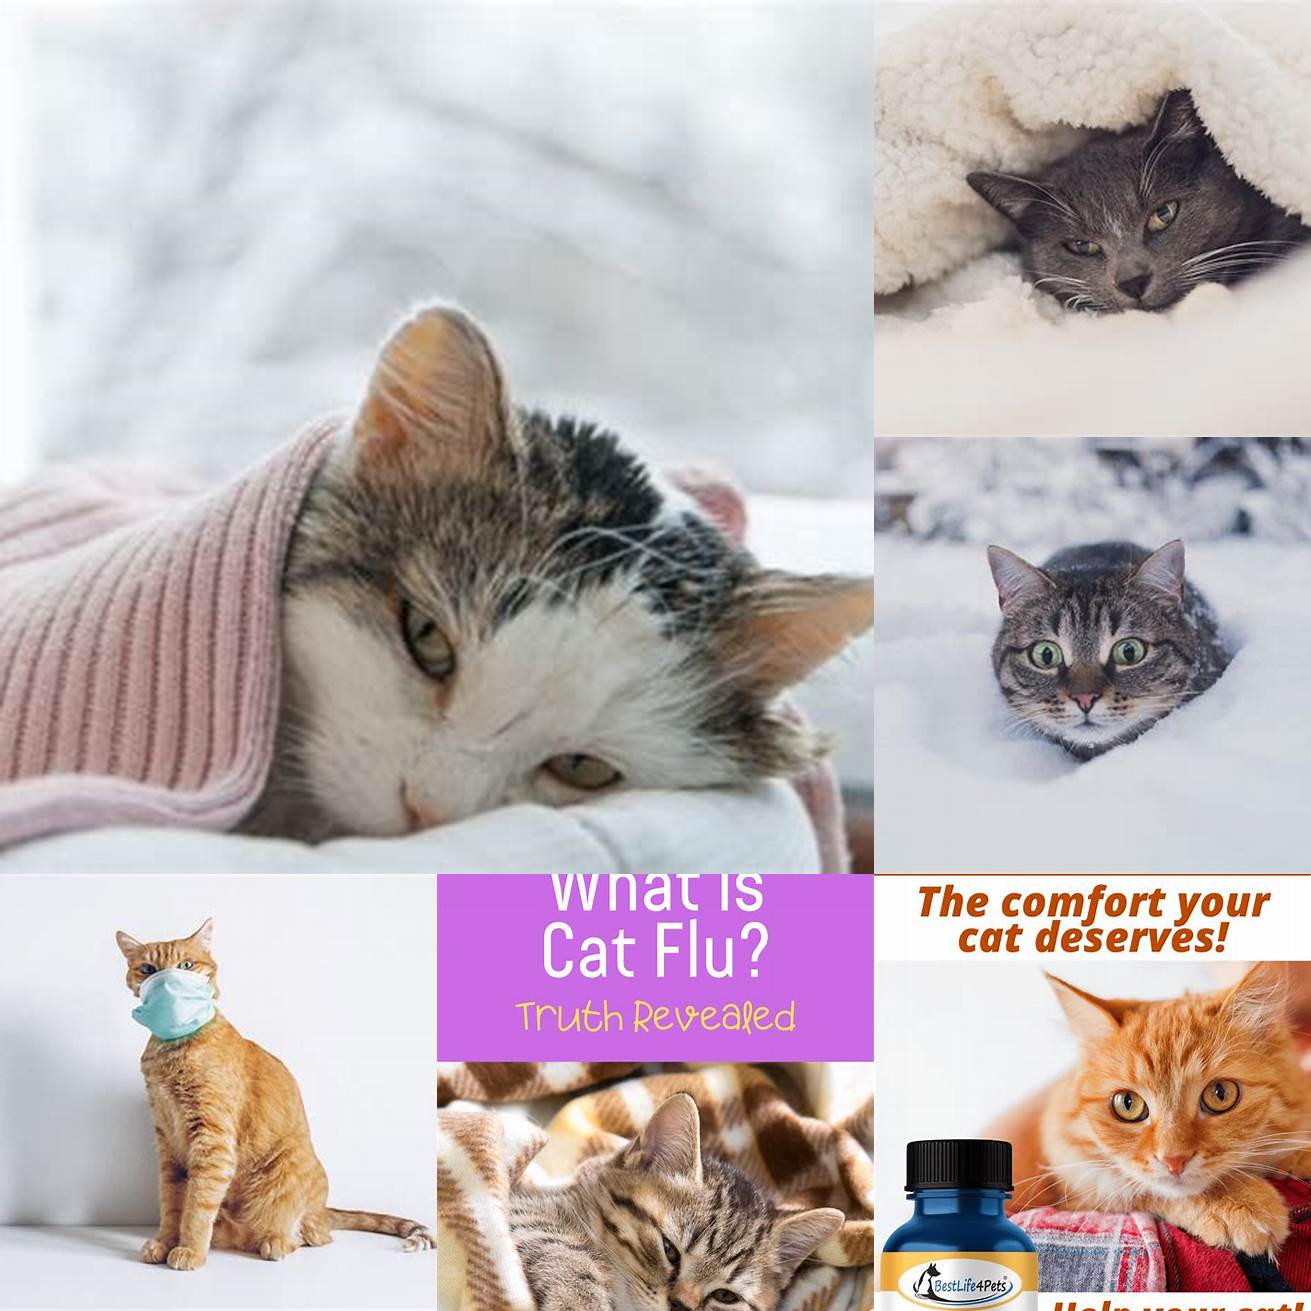 How can you prevent your cat from getting cold